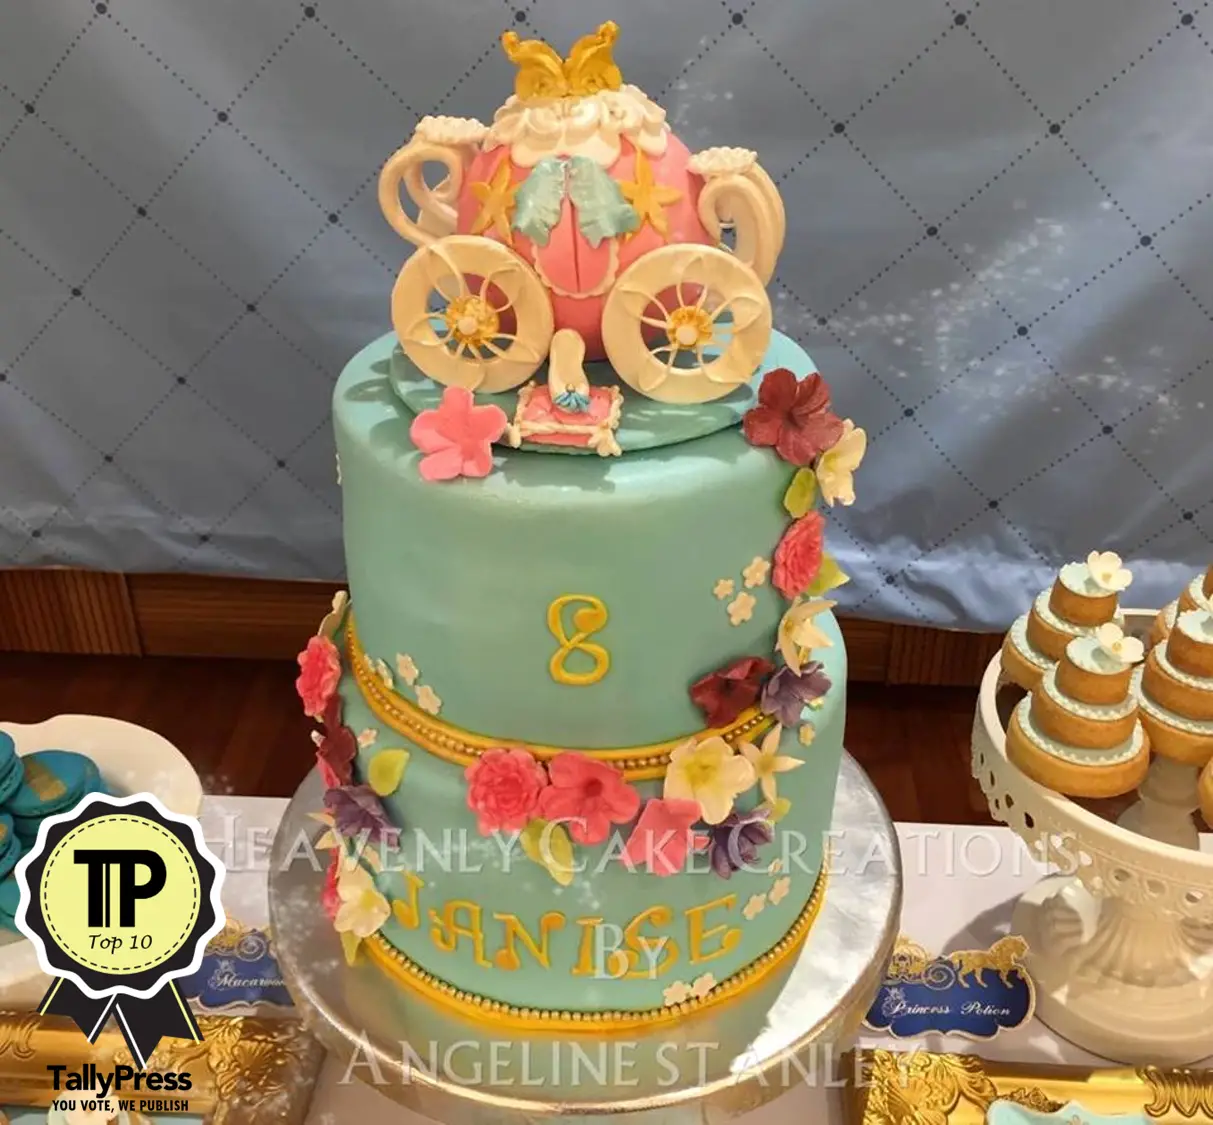 8-heavenly-cake-creations-by-angeline-malaysias-top-10-cake-specialists-jpg